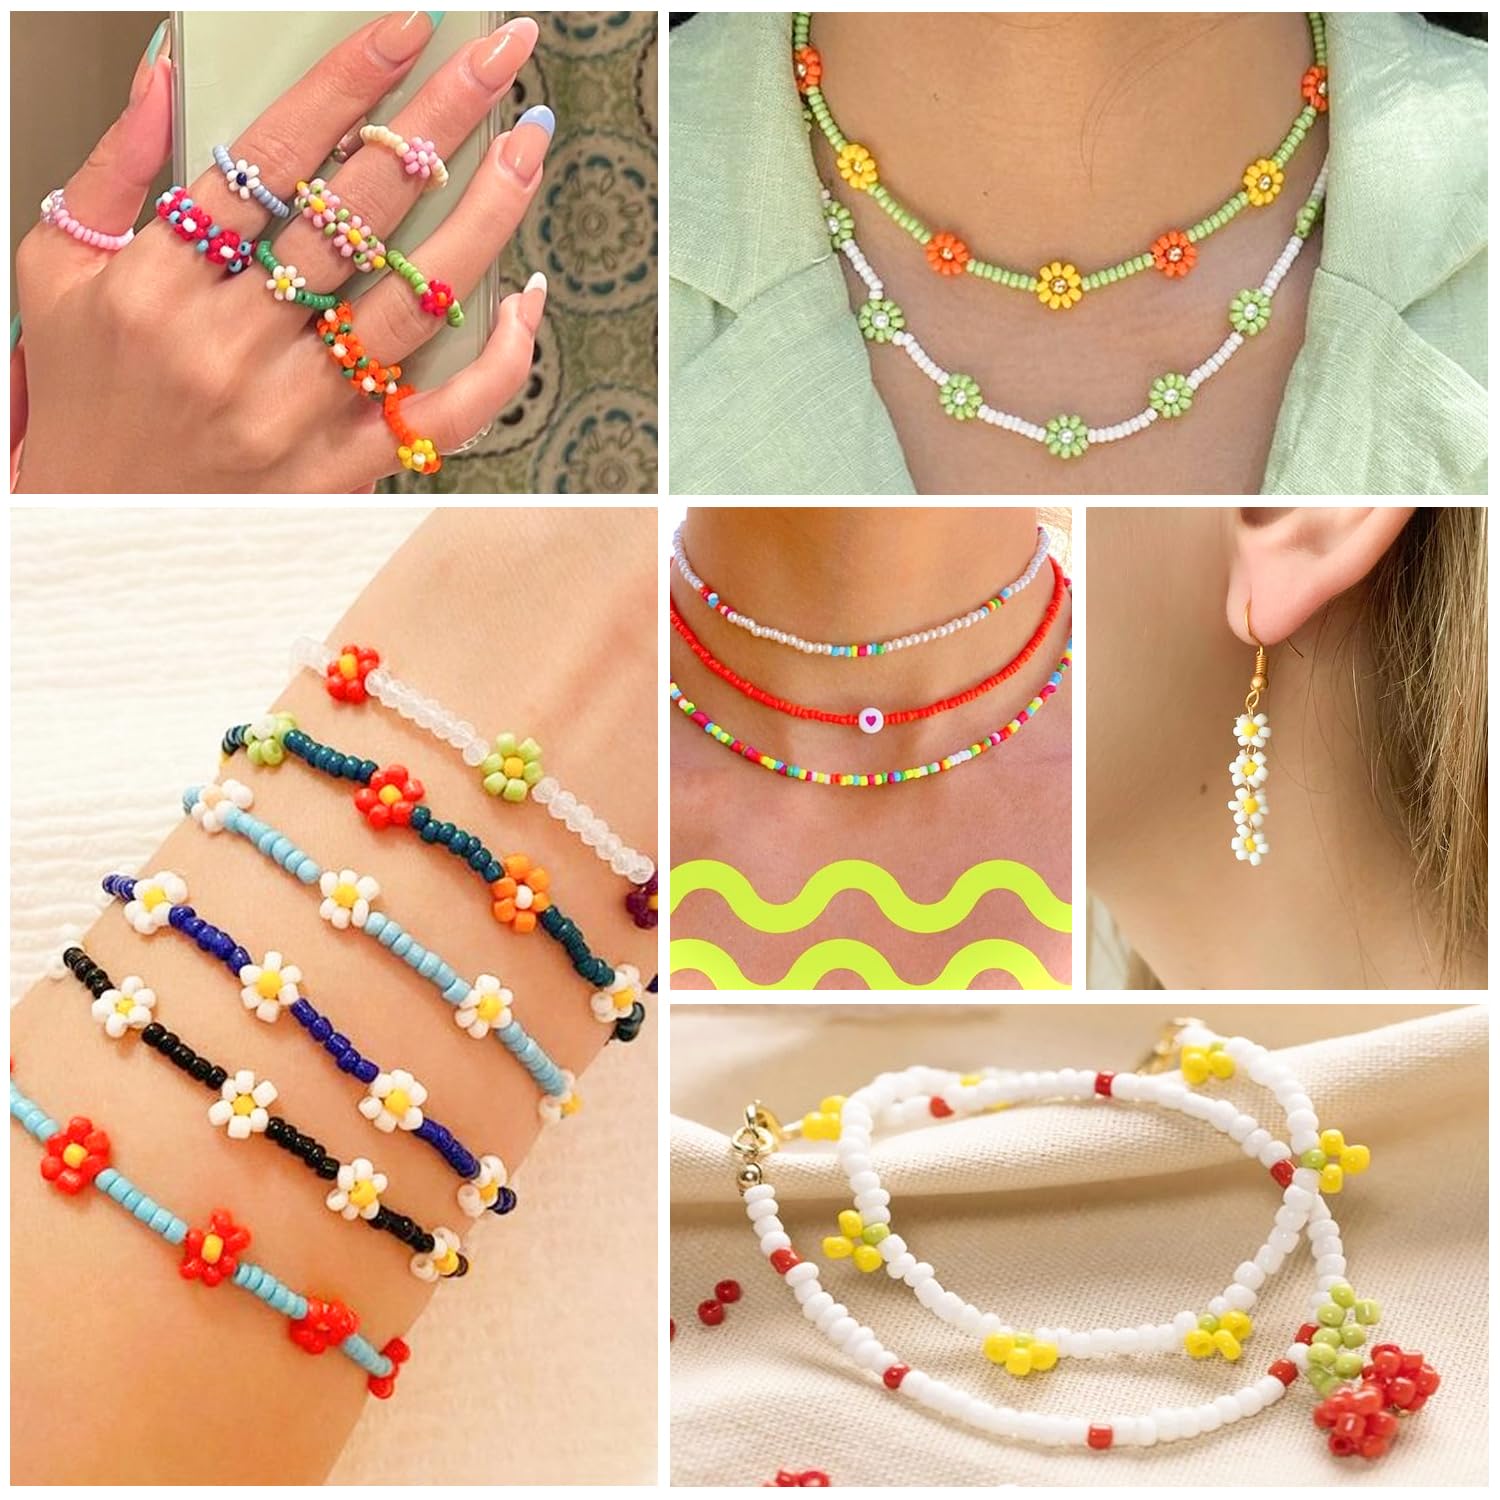 Gionlion Clay Beads Friendship Bracelet Making Kit,72 Colors Preppy Clay  Beads AZ Letter Beads Number Beads& Charms Kit Complete Friendship Jewelry